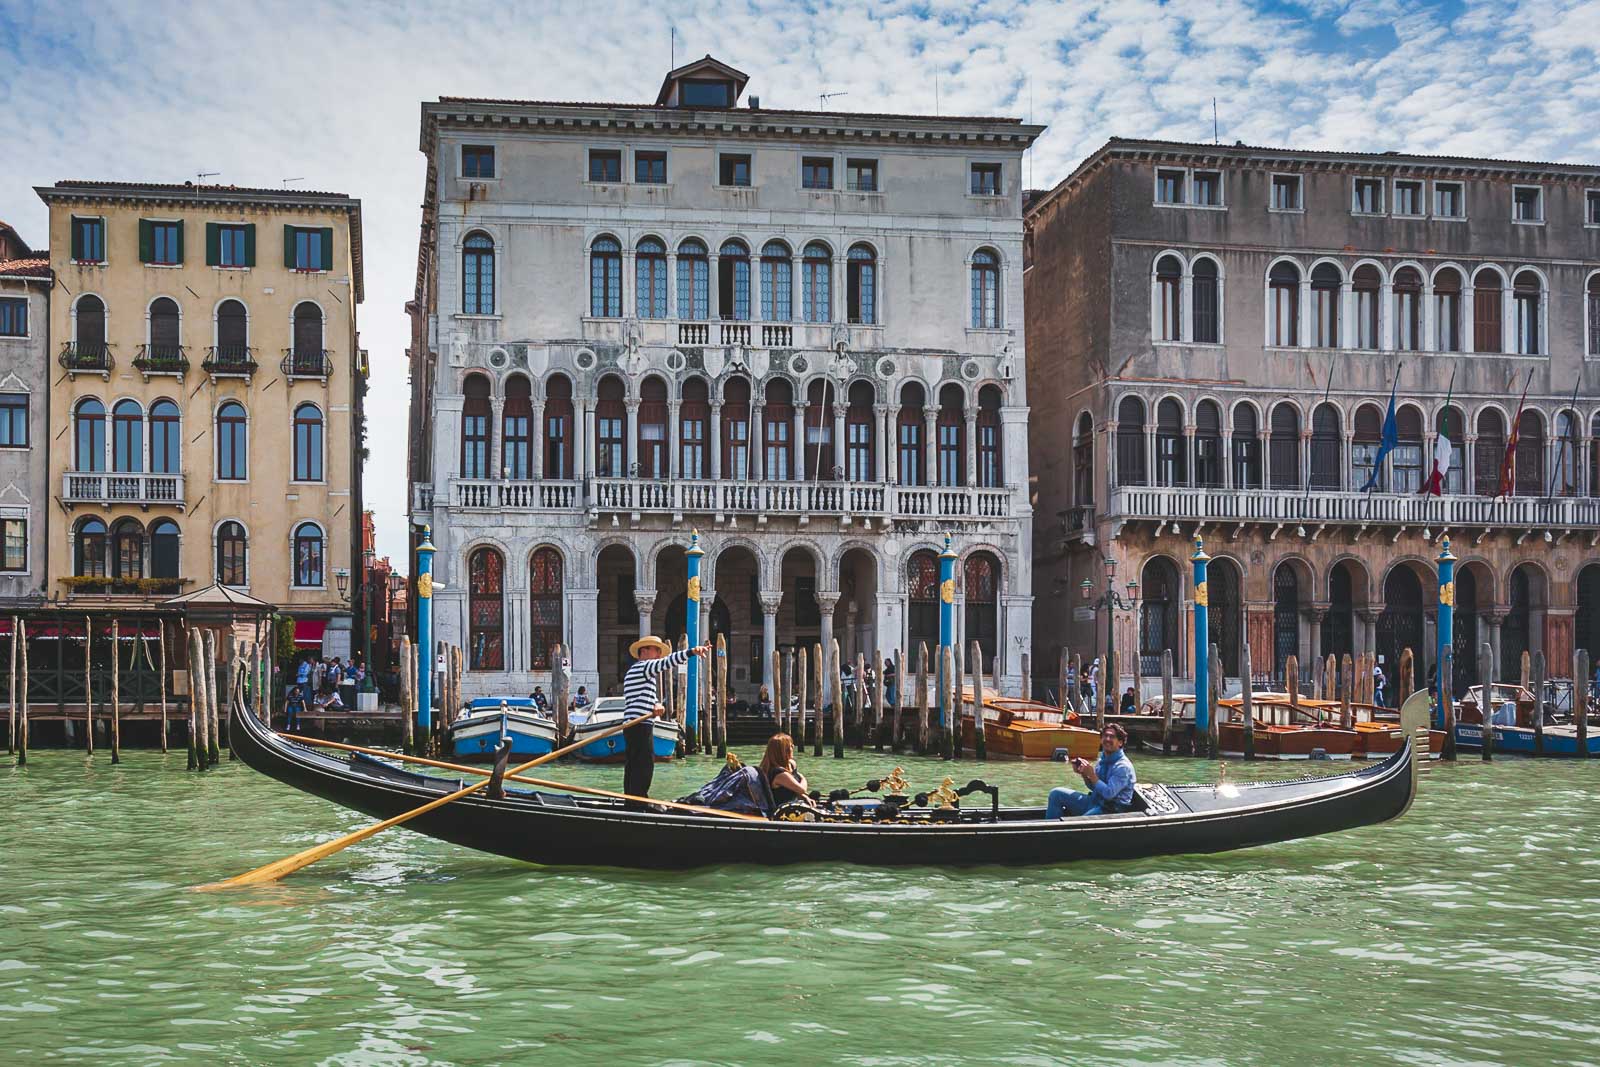 Gondola rides on the grand canal - best things to do in Venice